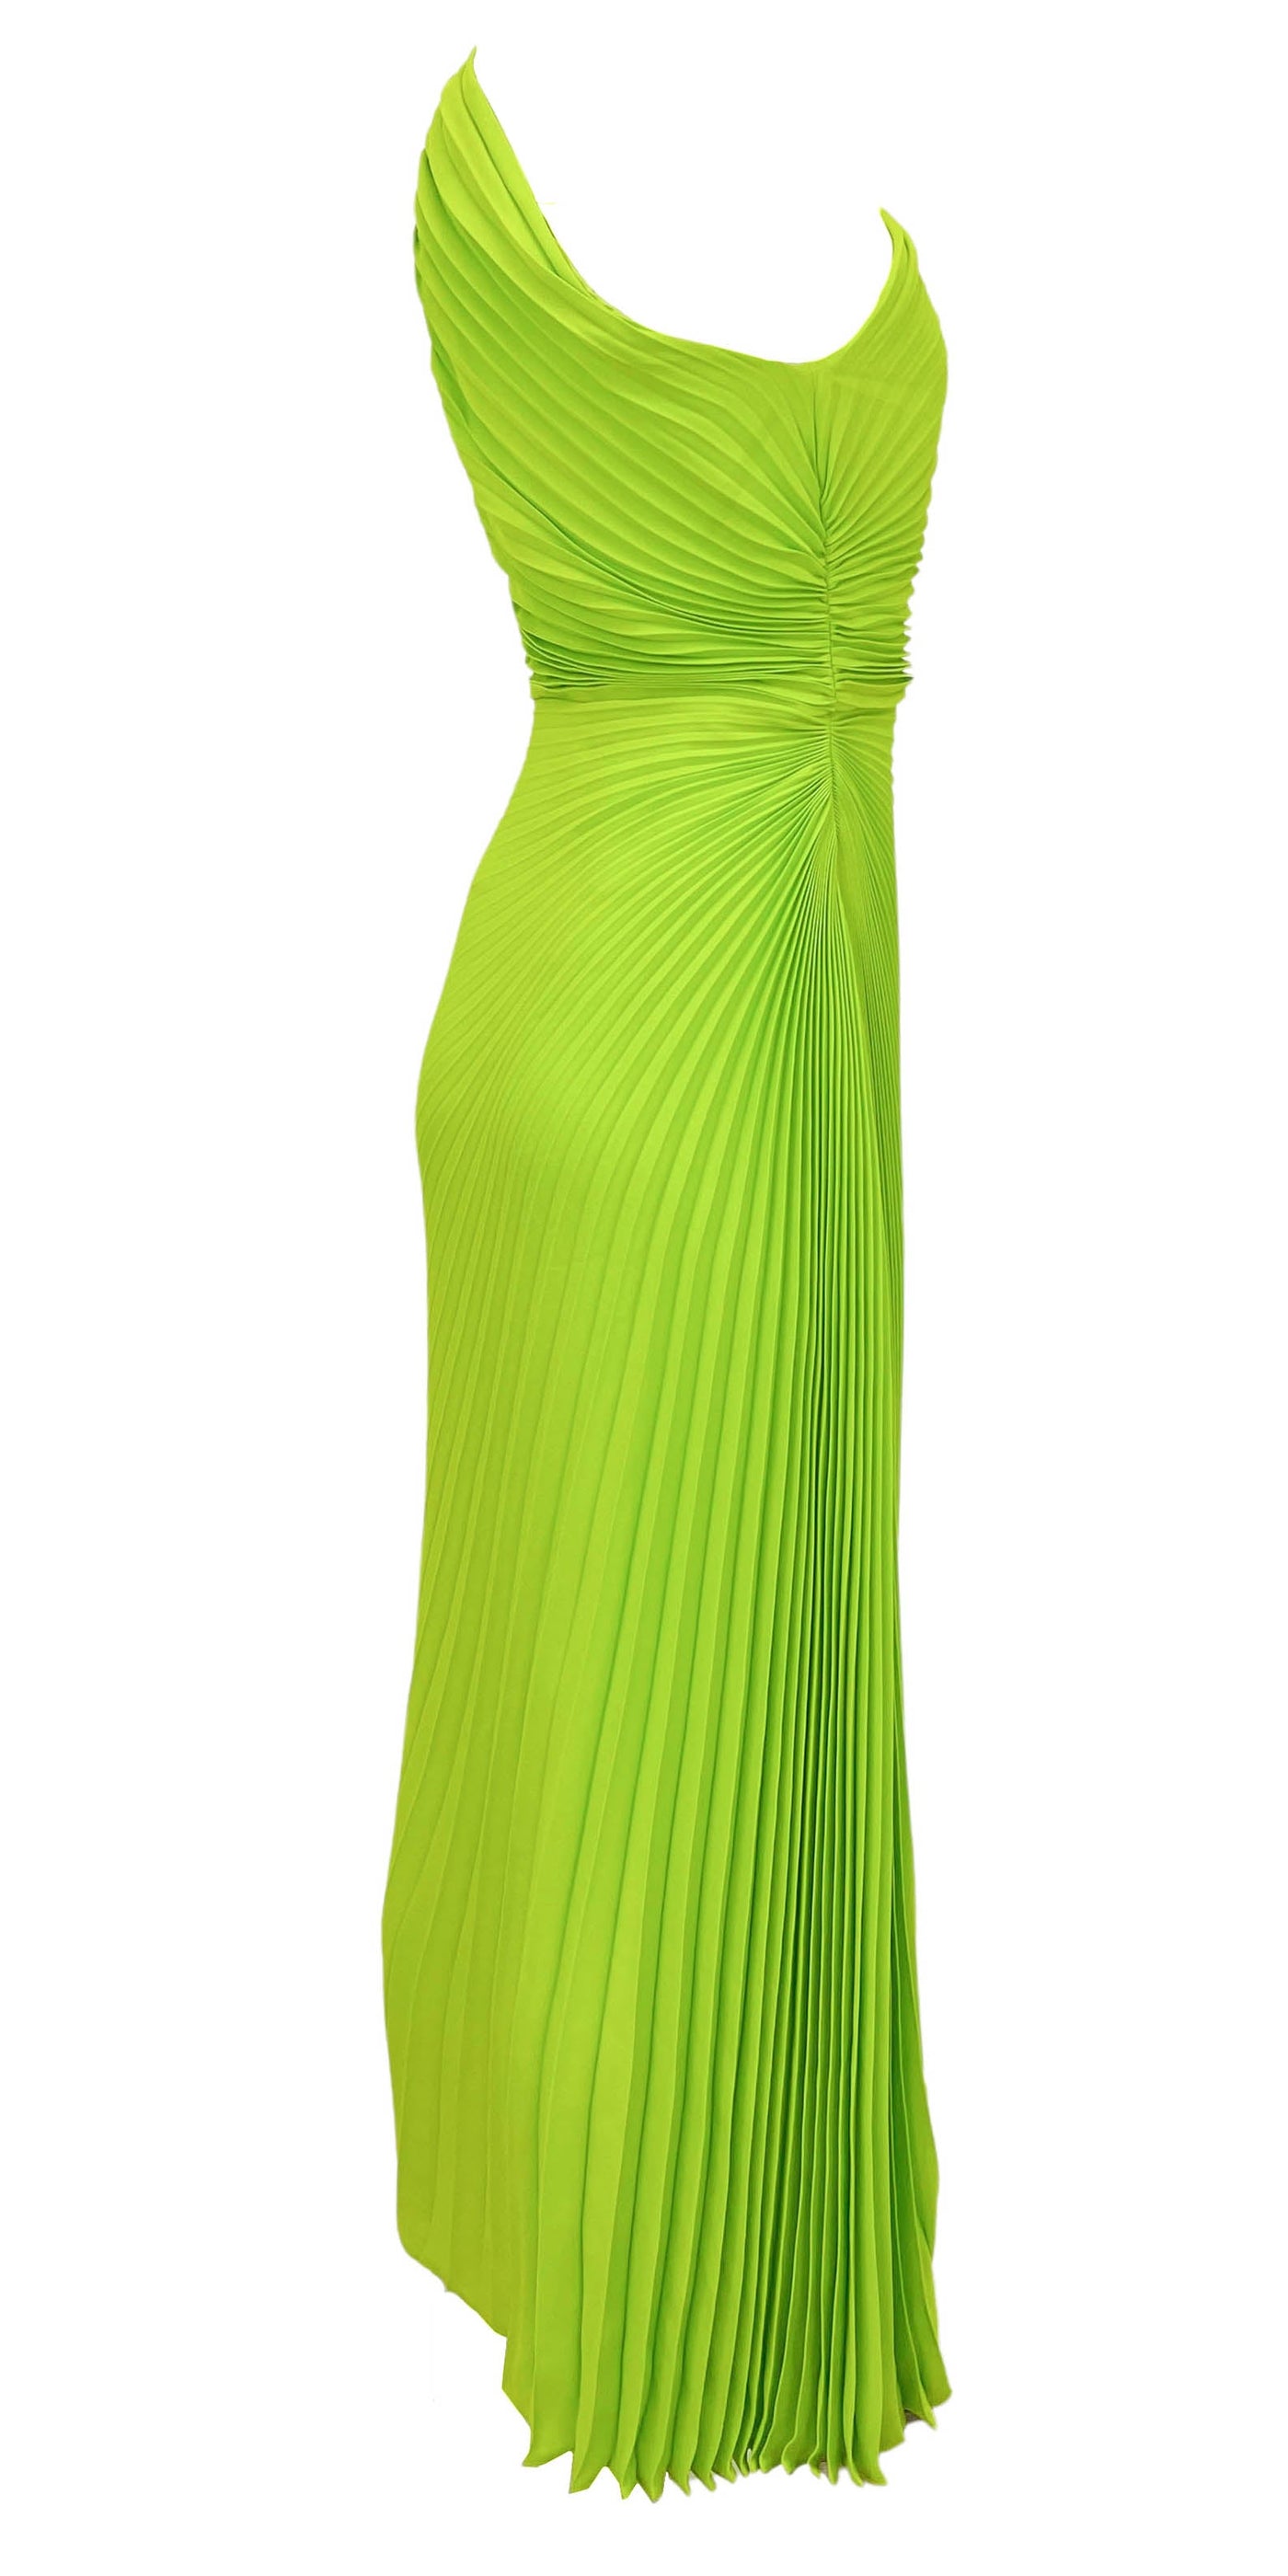 Valentino One Shoulder Pleated Dress in Lime Green - Discounts on Valentino at UAL